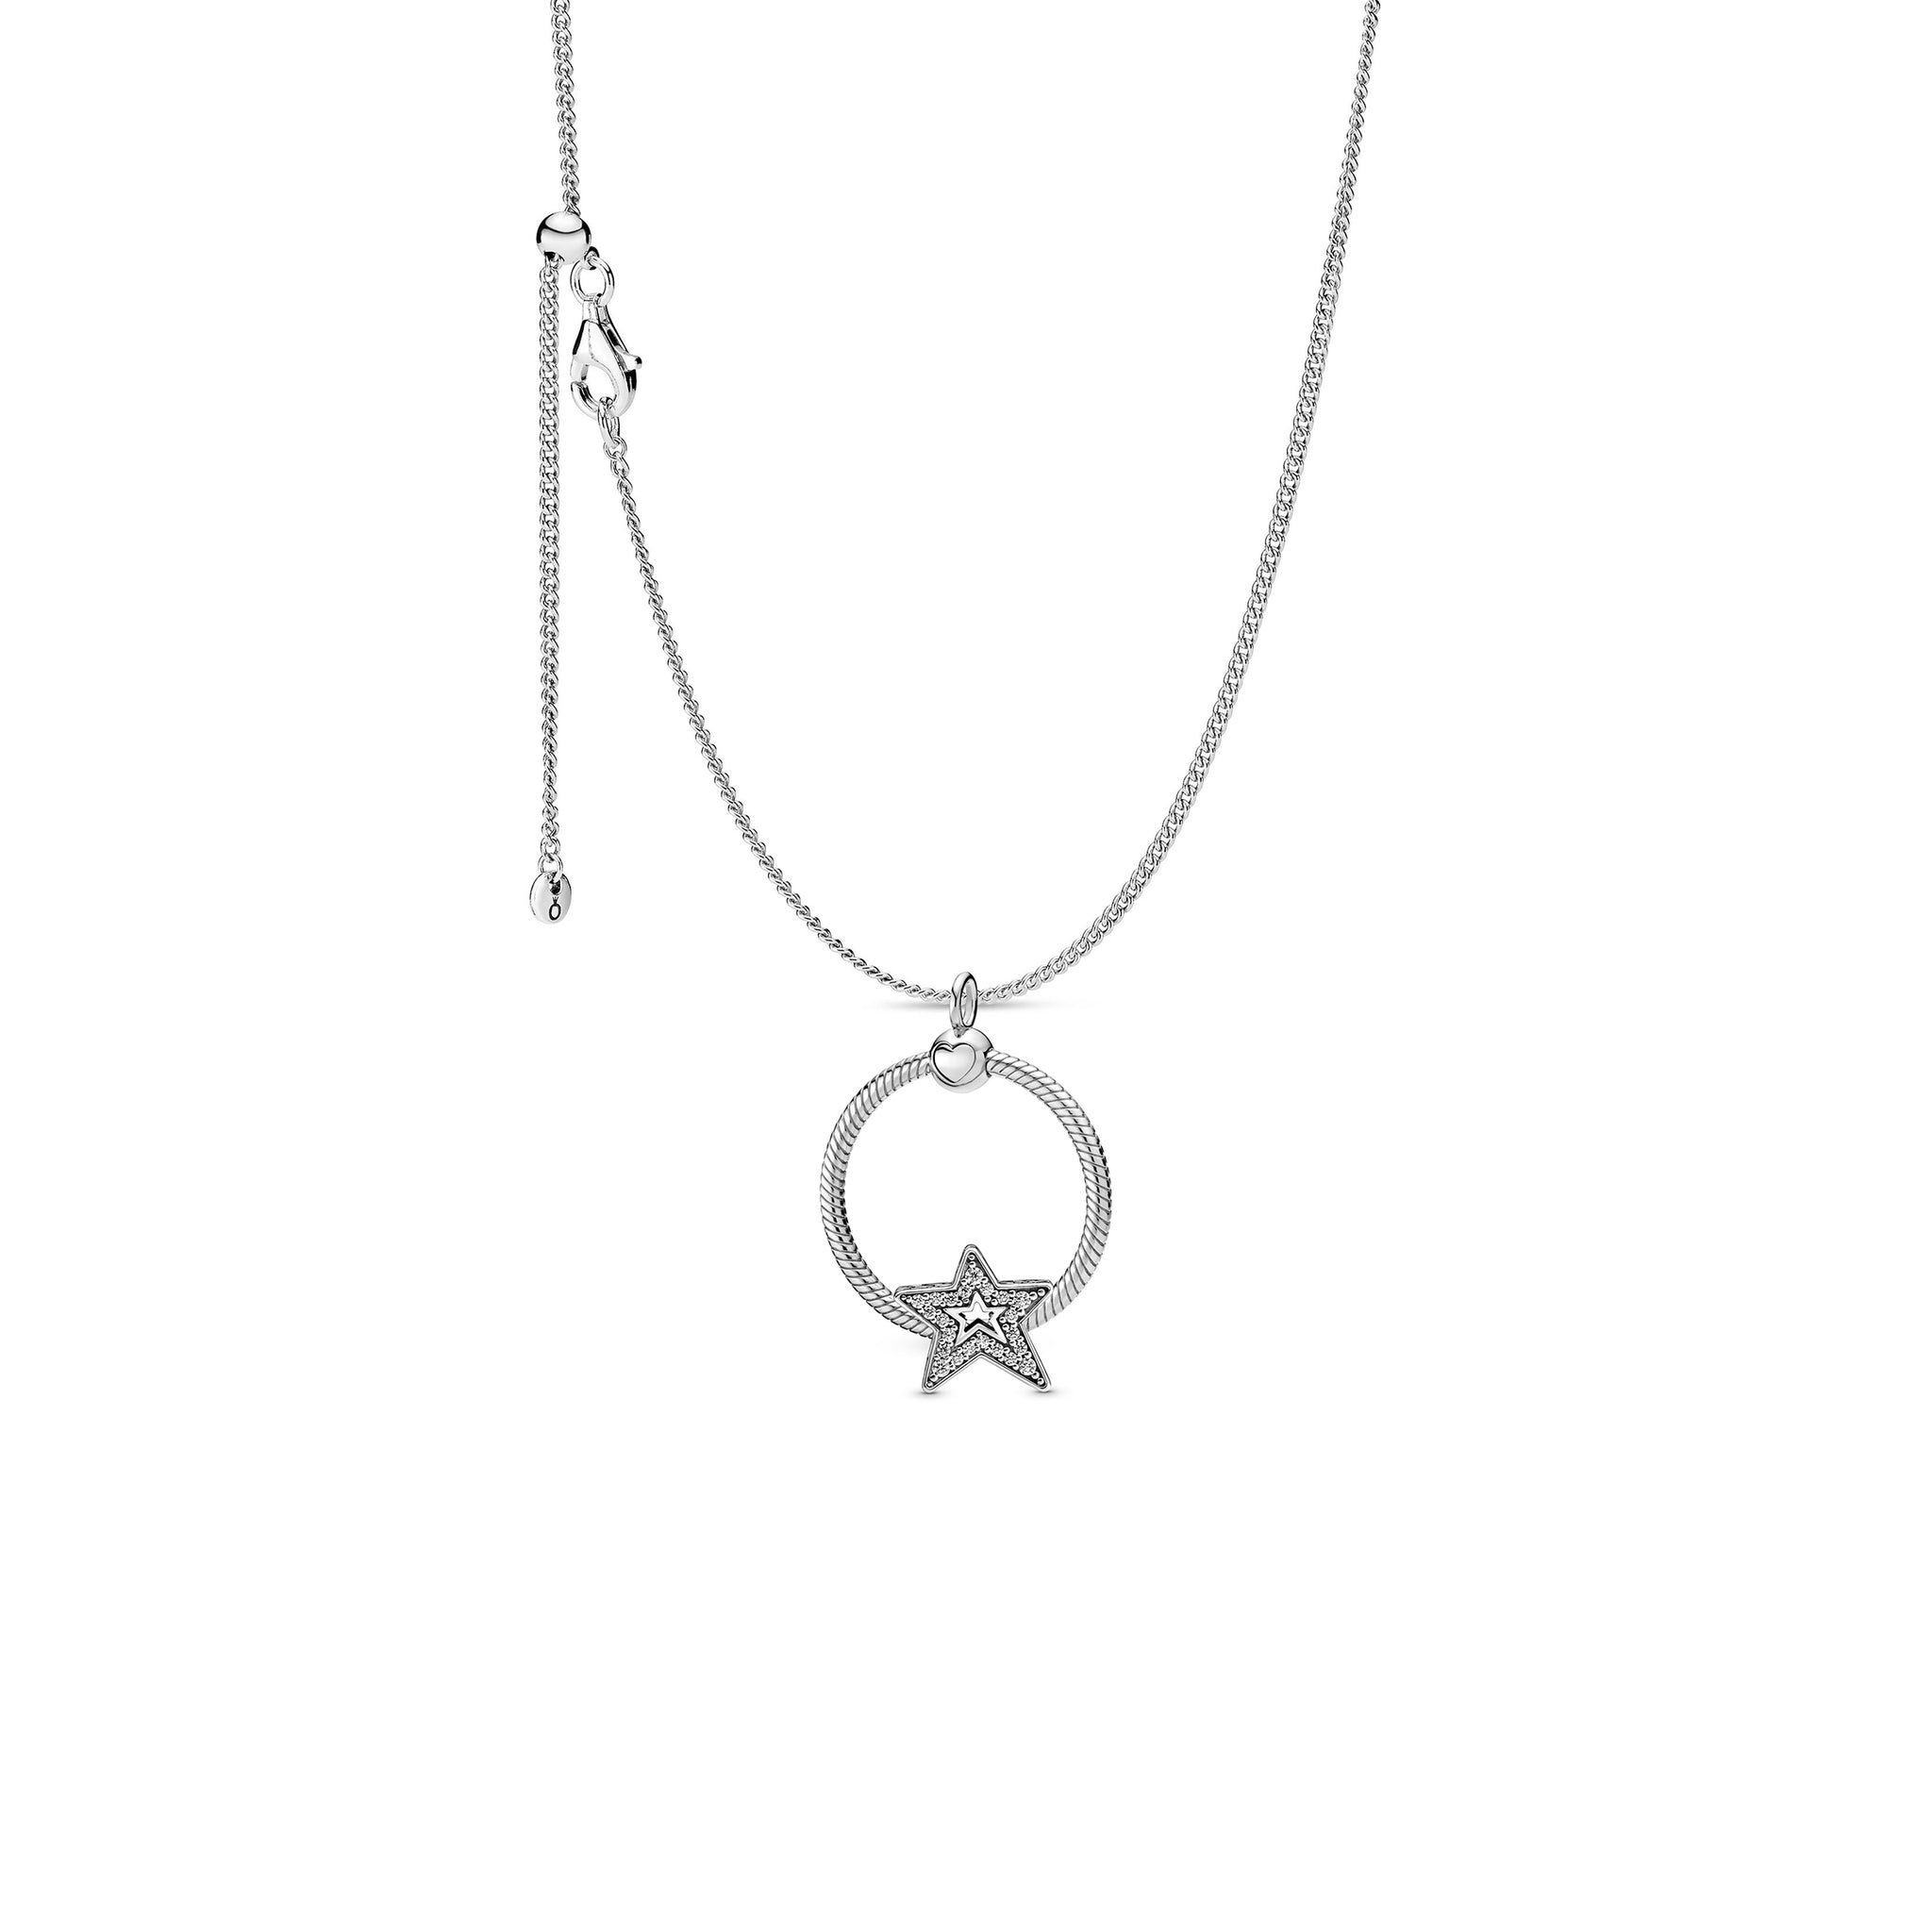 Star silver necklace with clear cubic zirconia